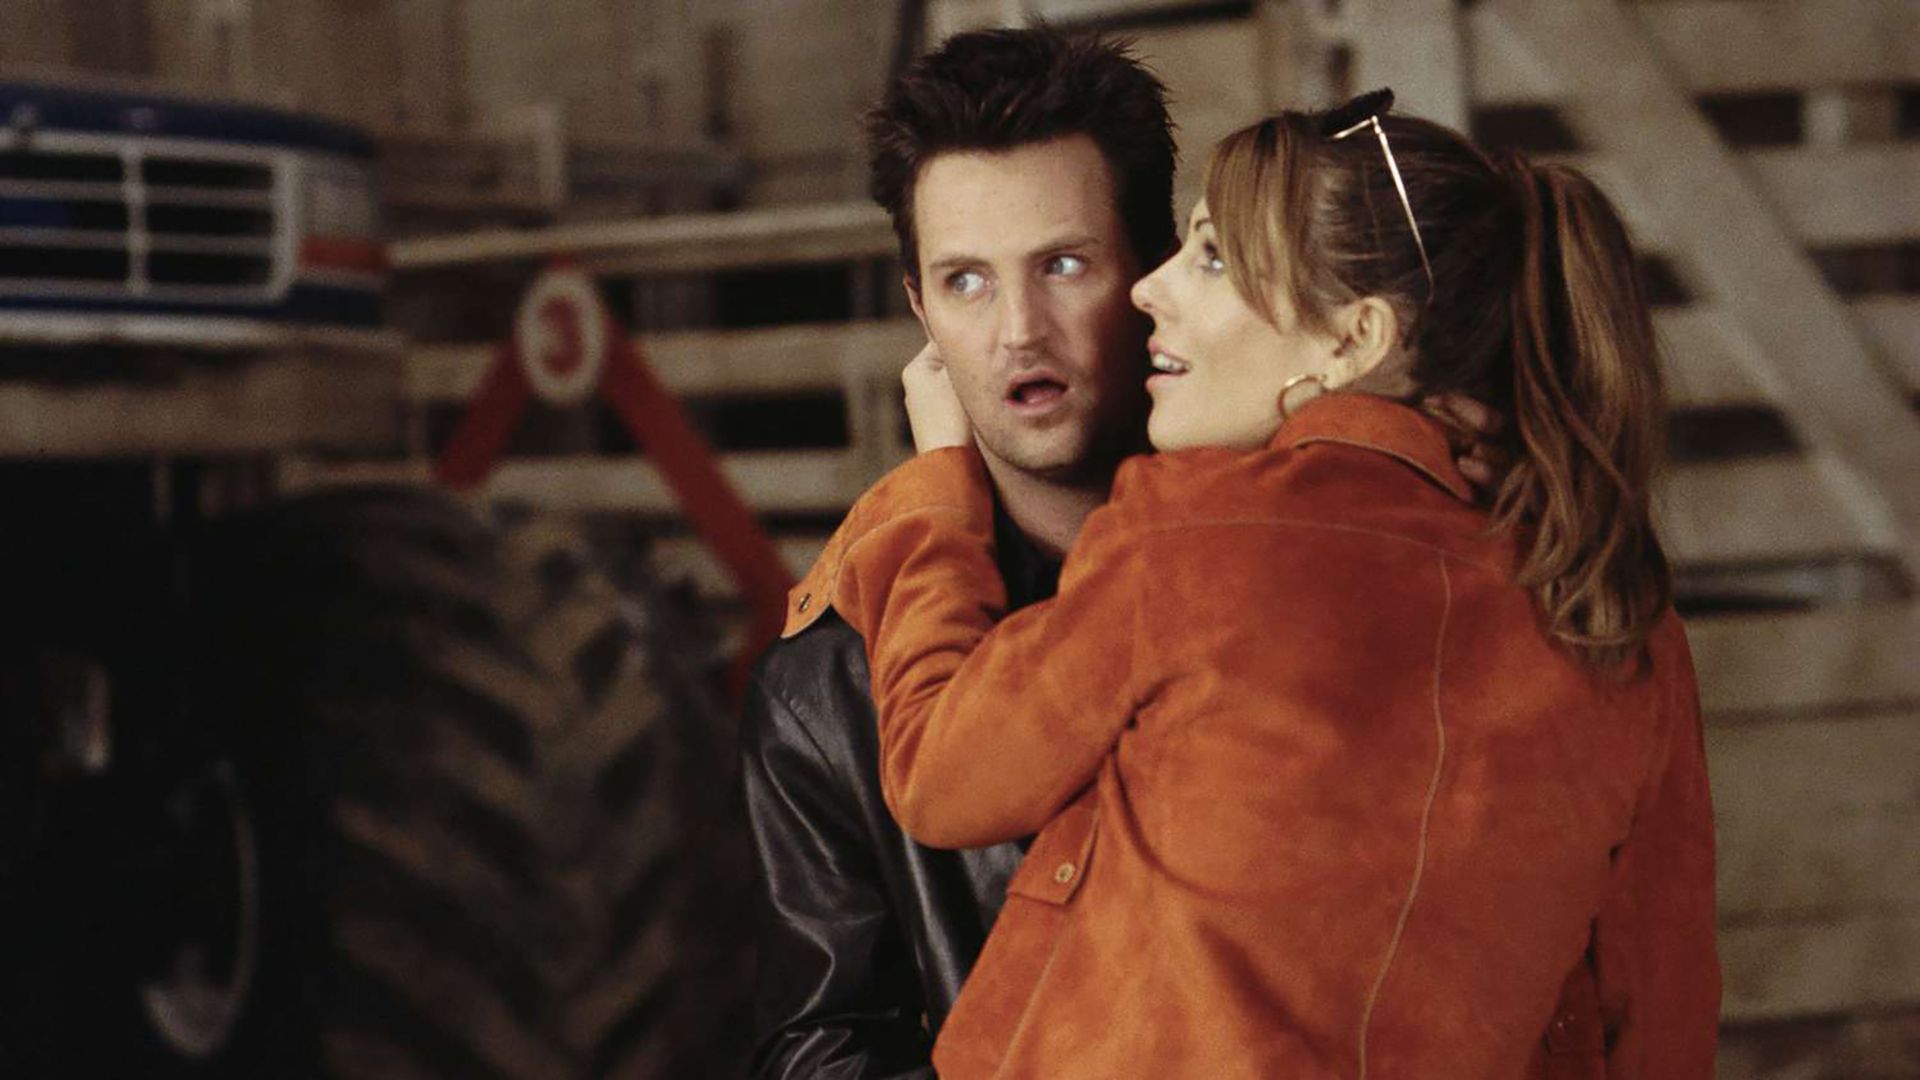 Matthew Perry in the movie 'Serving Sara'